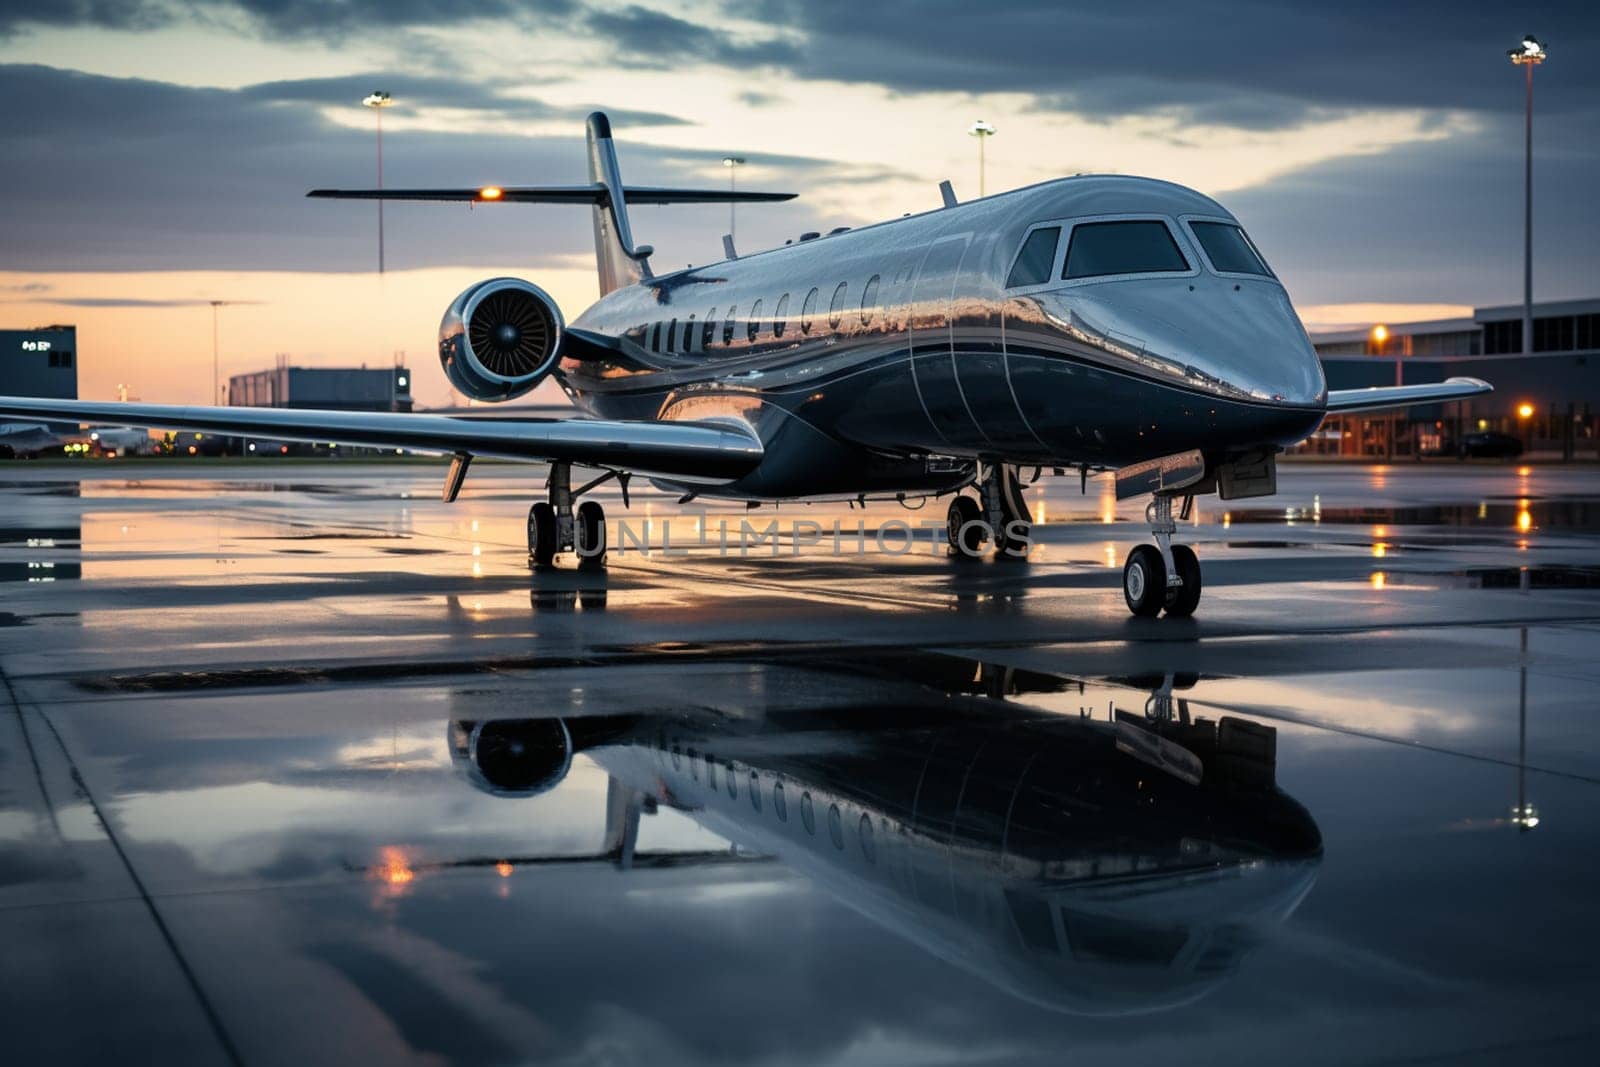 Private jet on the runway. High quality photo